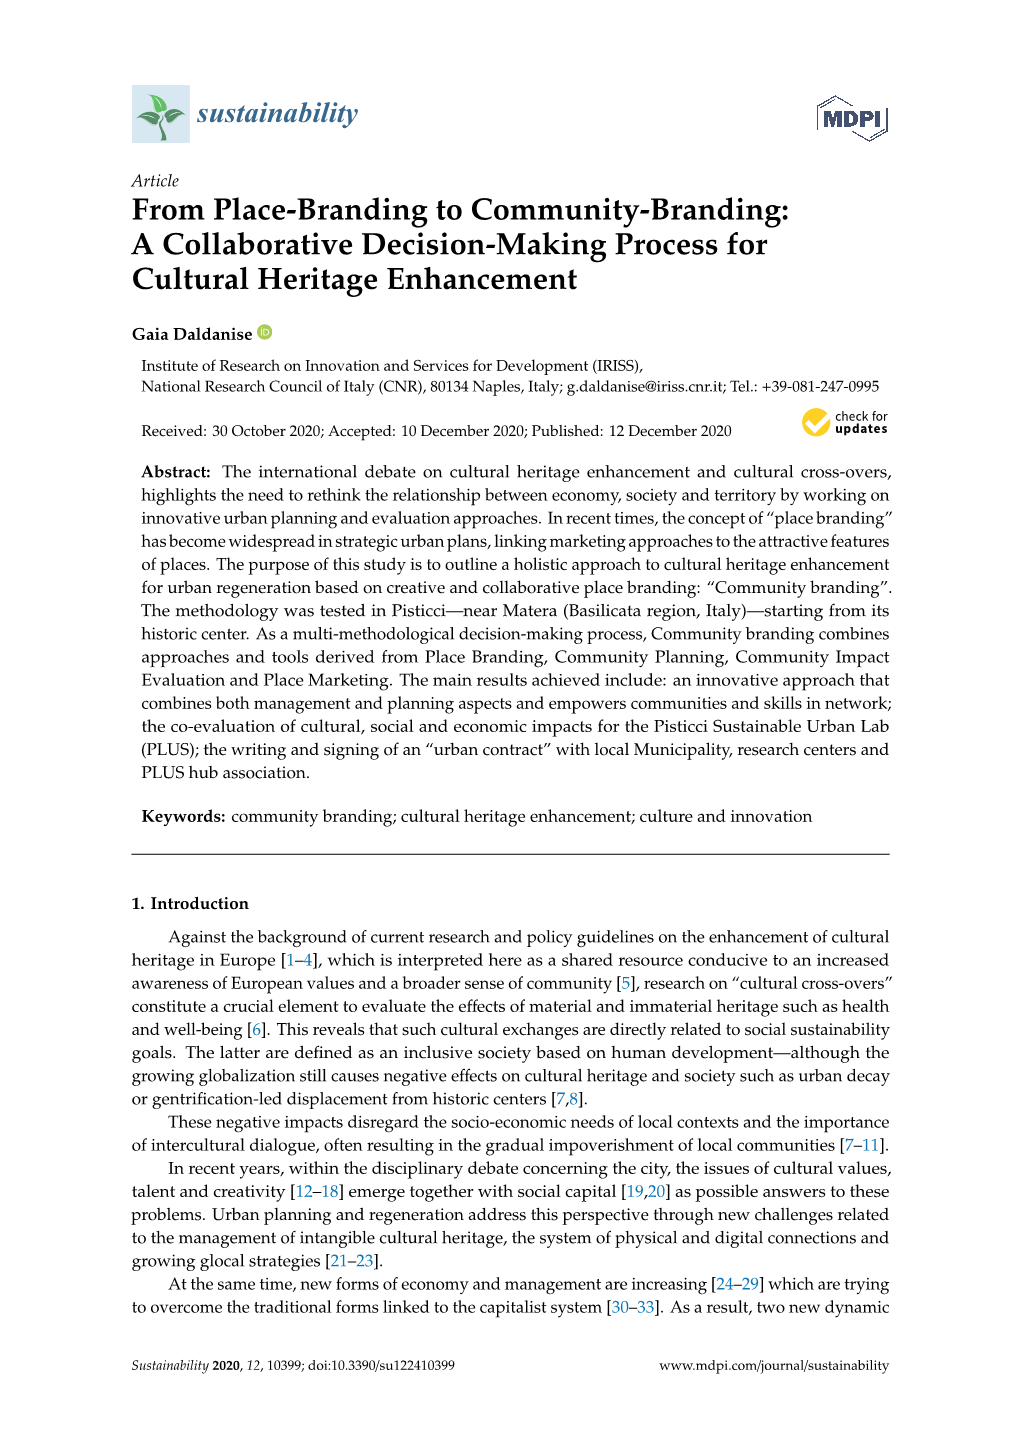 A Collaborative Decision-Making Process for Cultural Heritage Enhancement